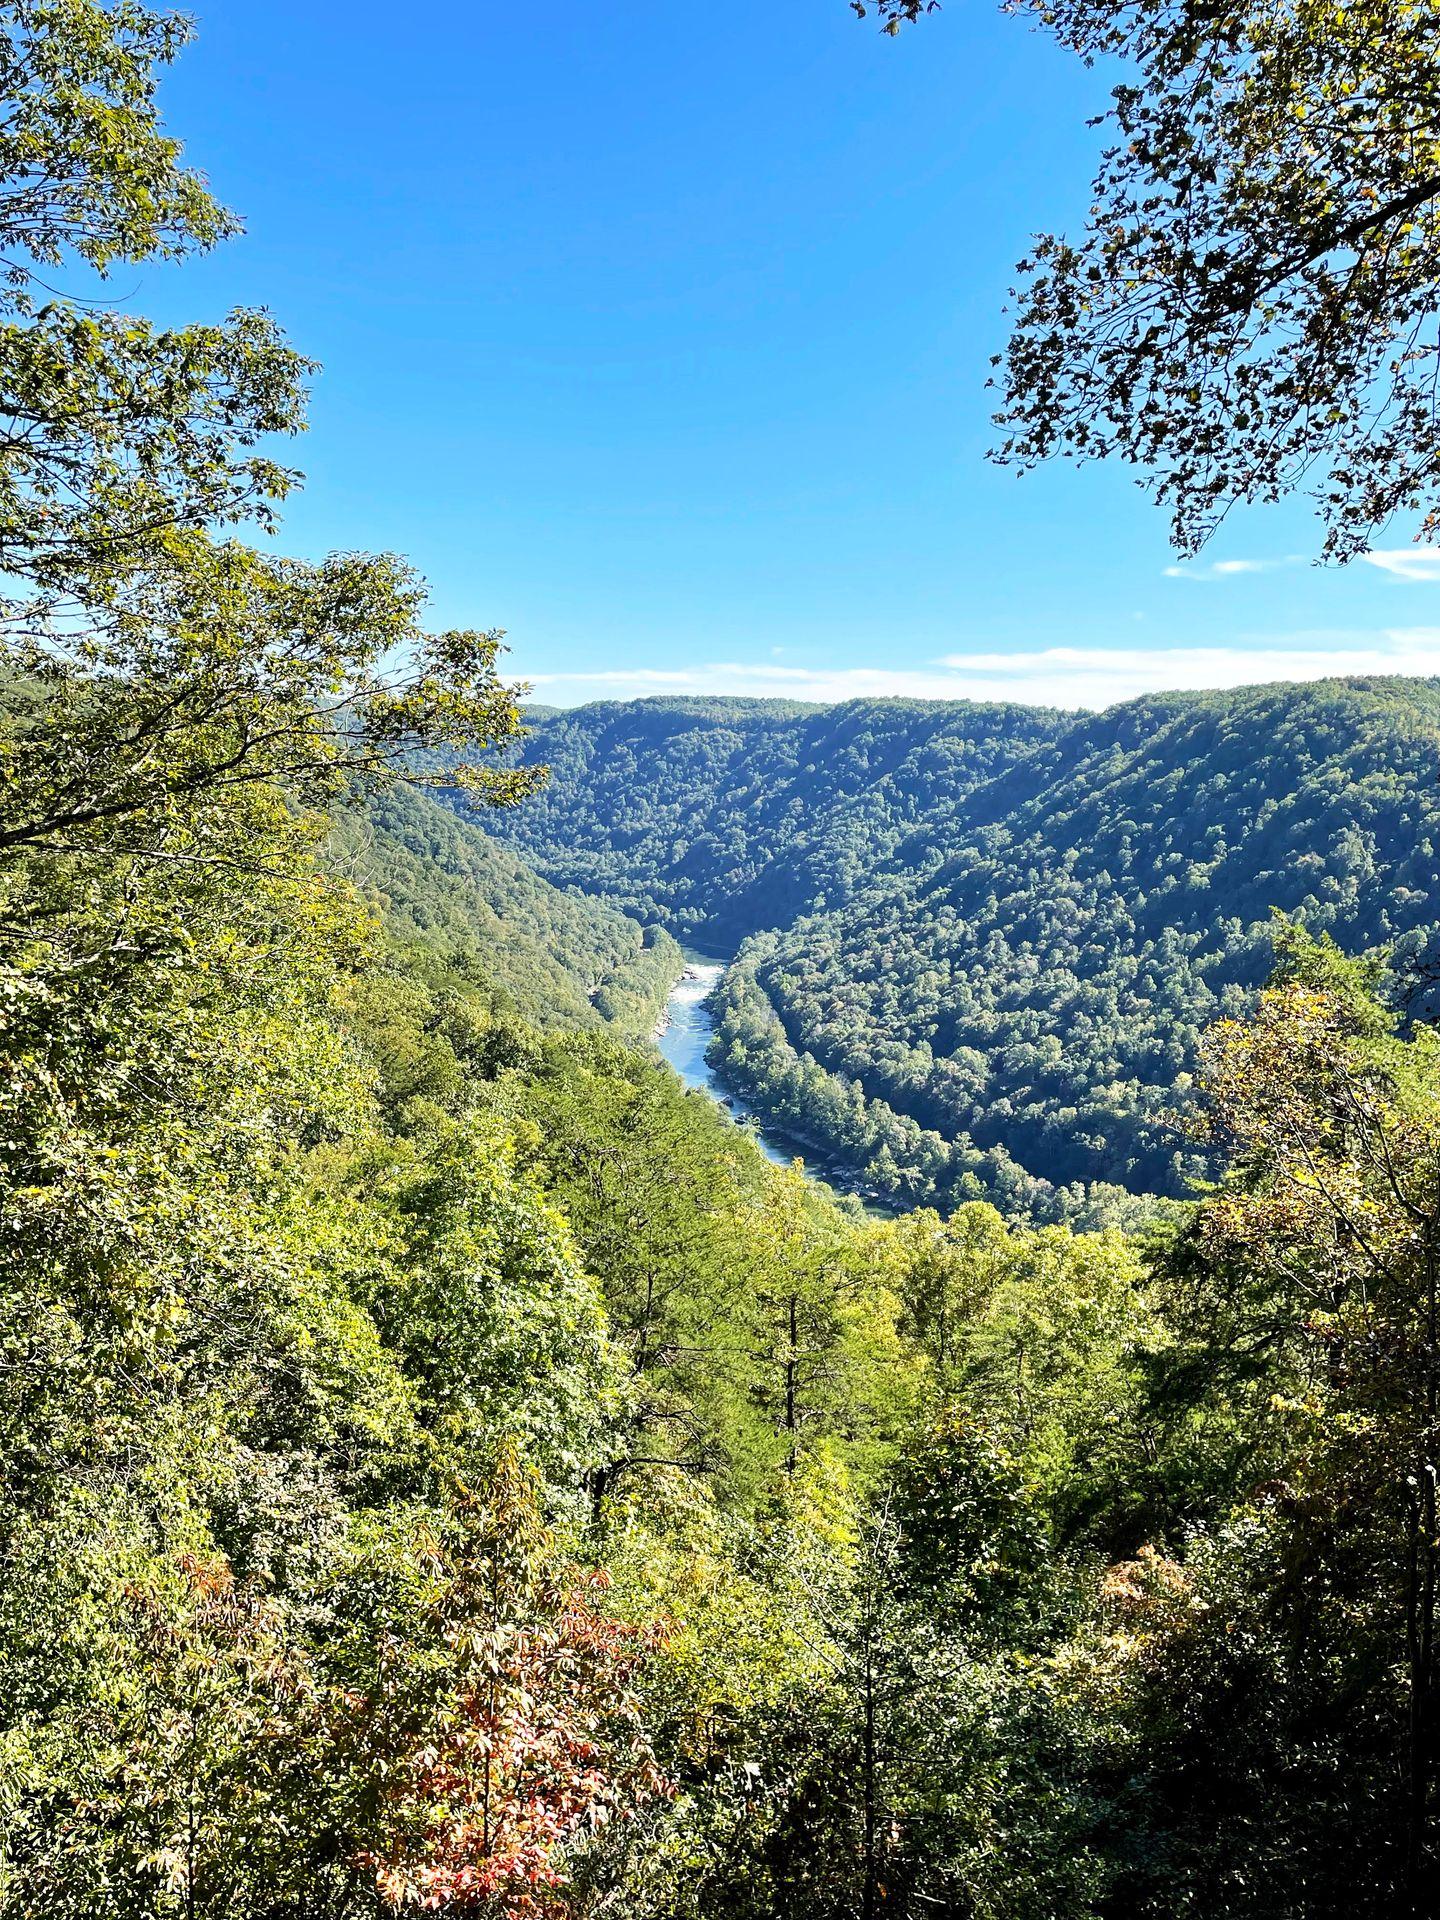 A view of the New River from the Canyon Rim Visitor Center.